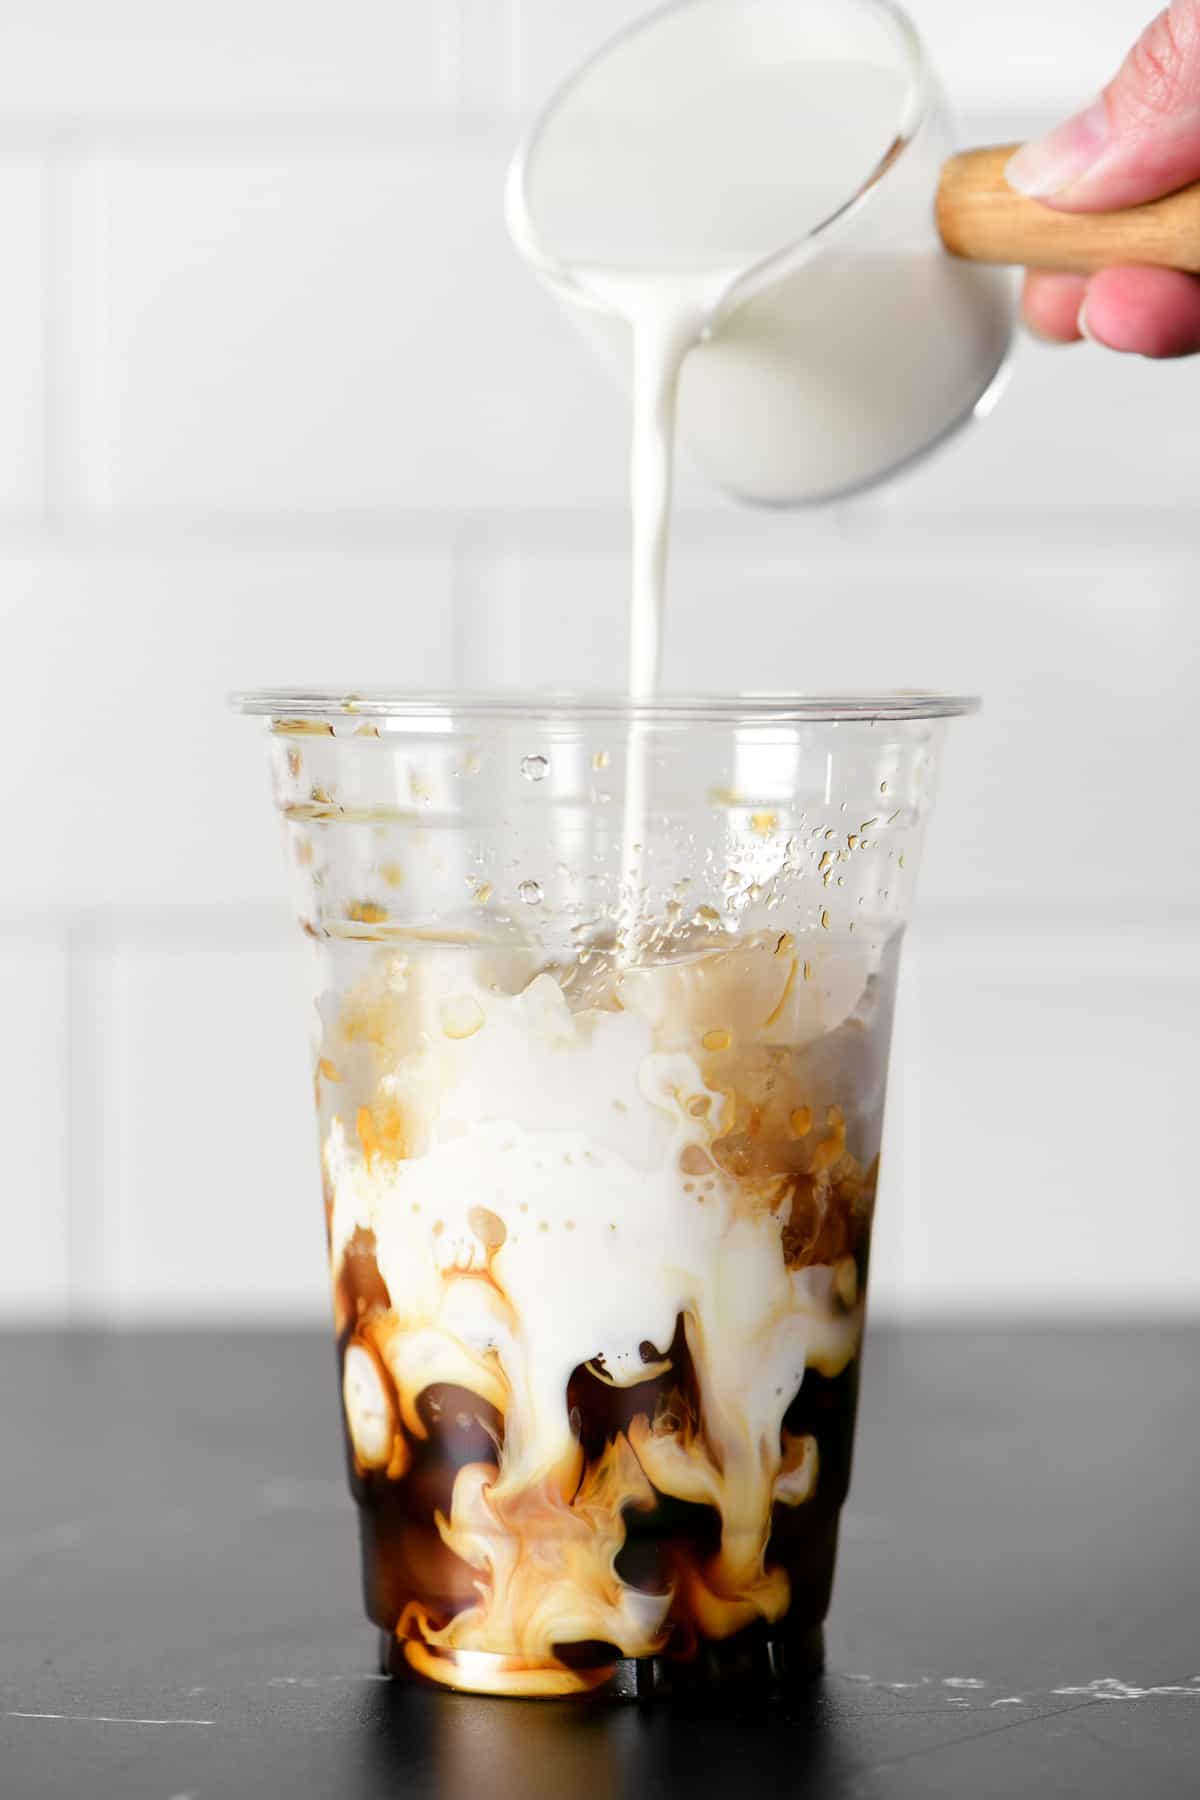 A hand pouring cream into a cup of iced coffee.